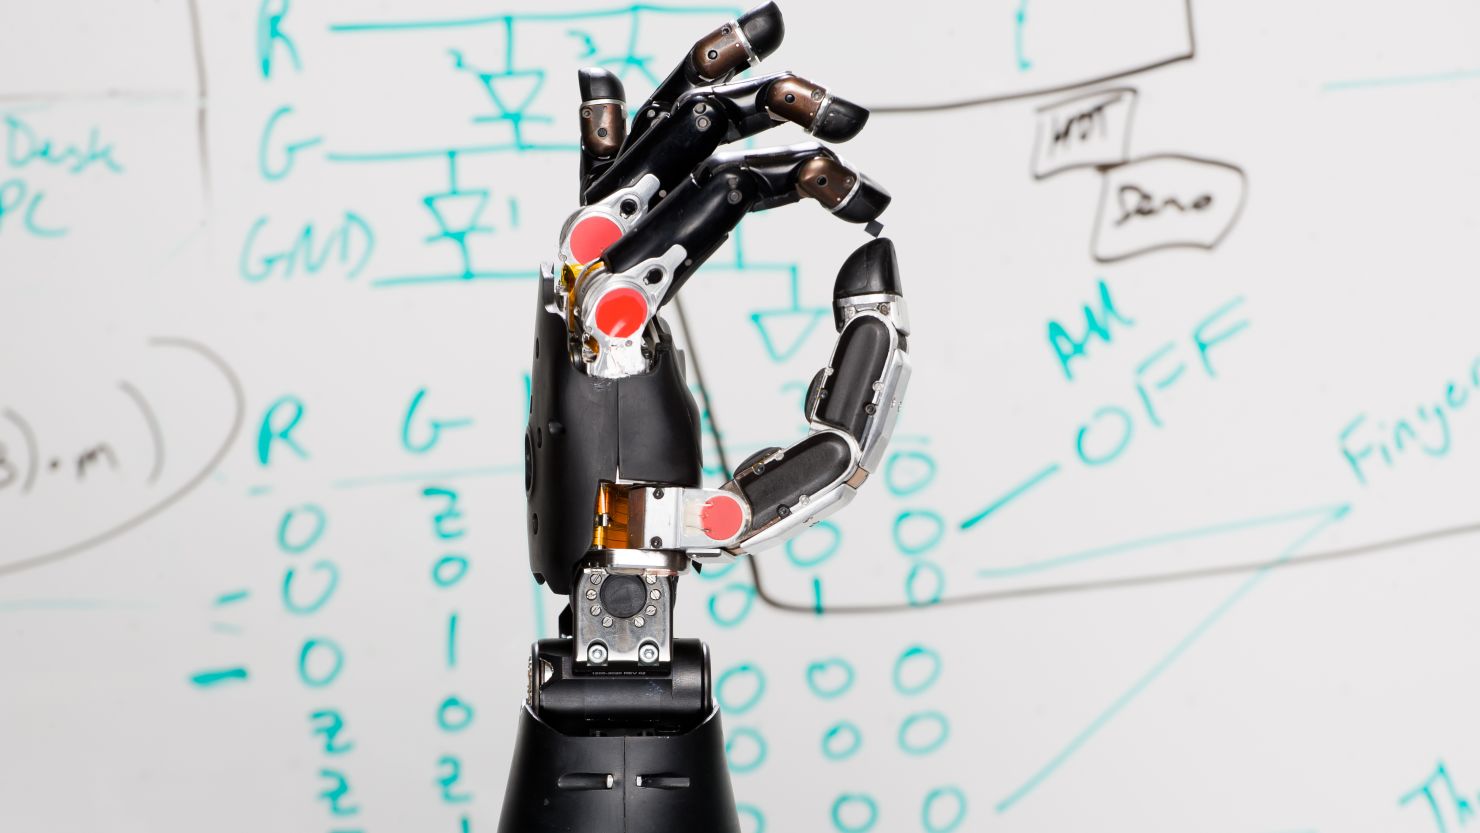 Prosthetic hand 'tells' the brain what it is touching